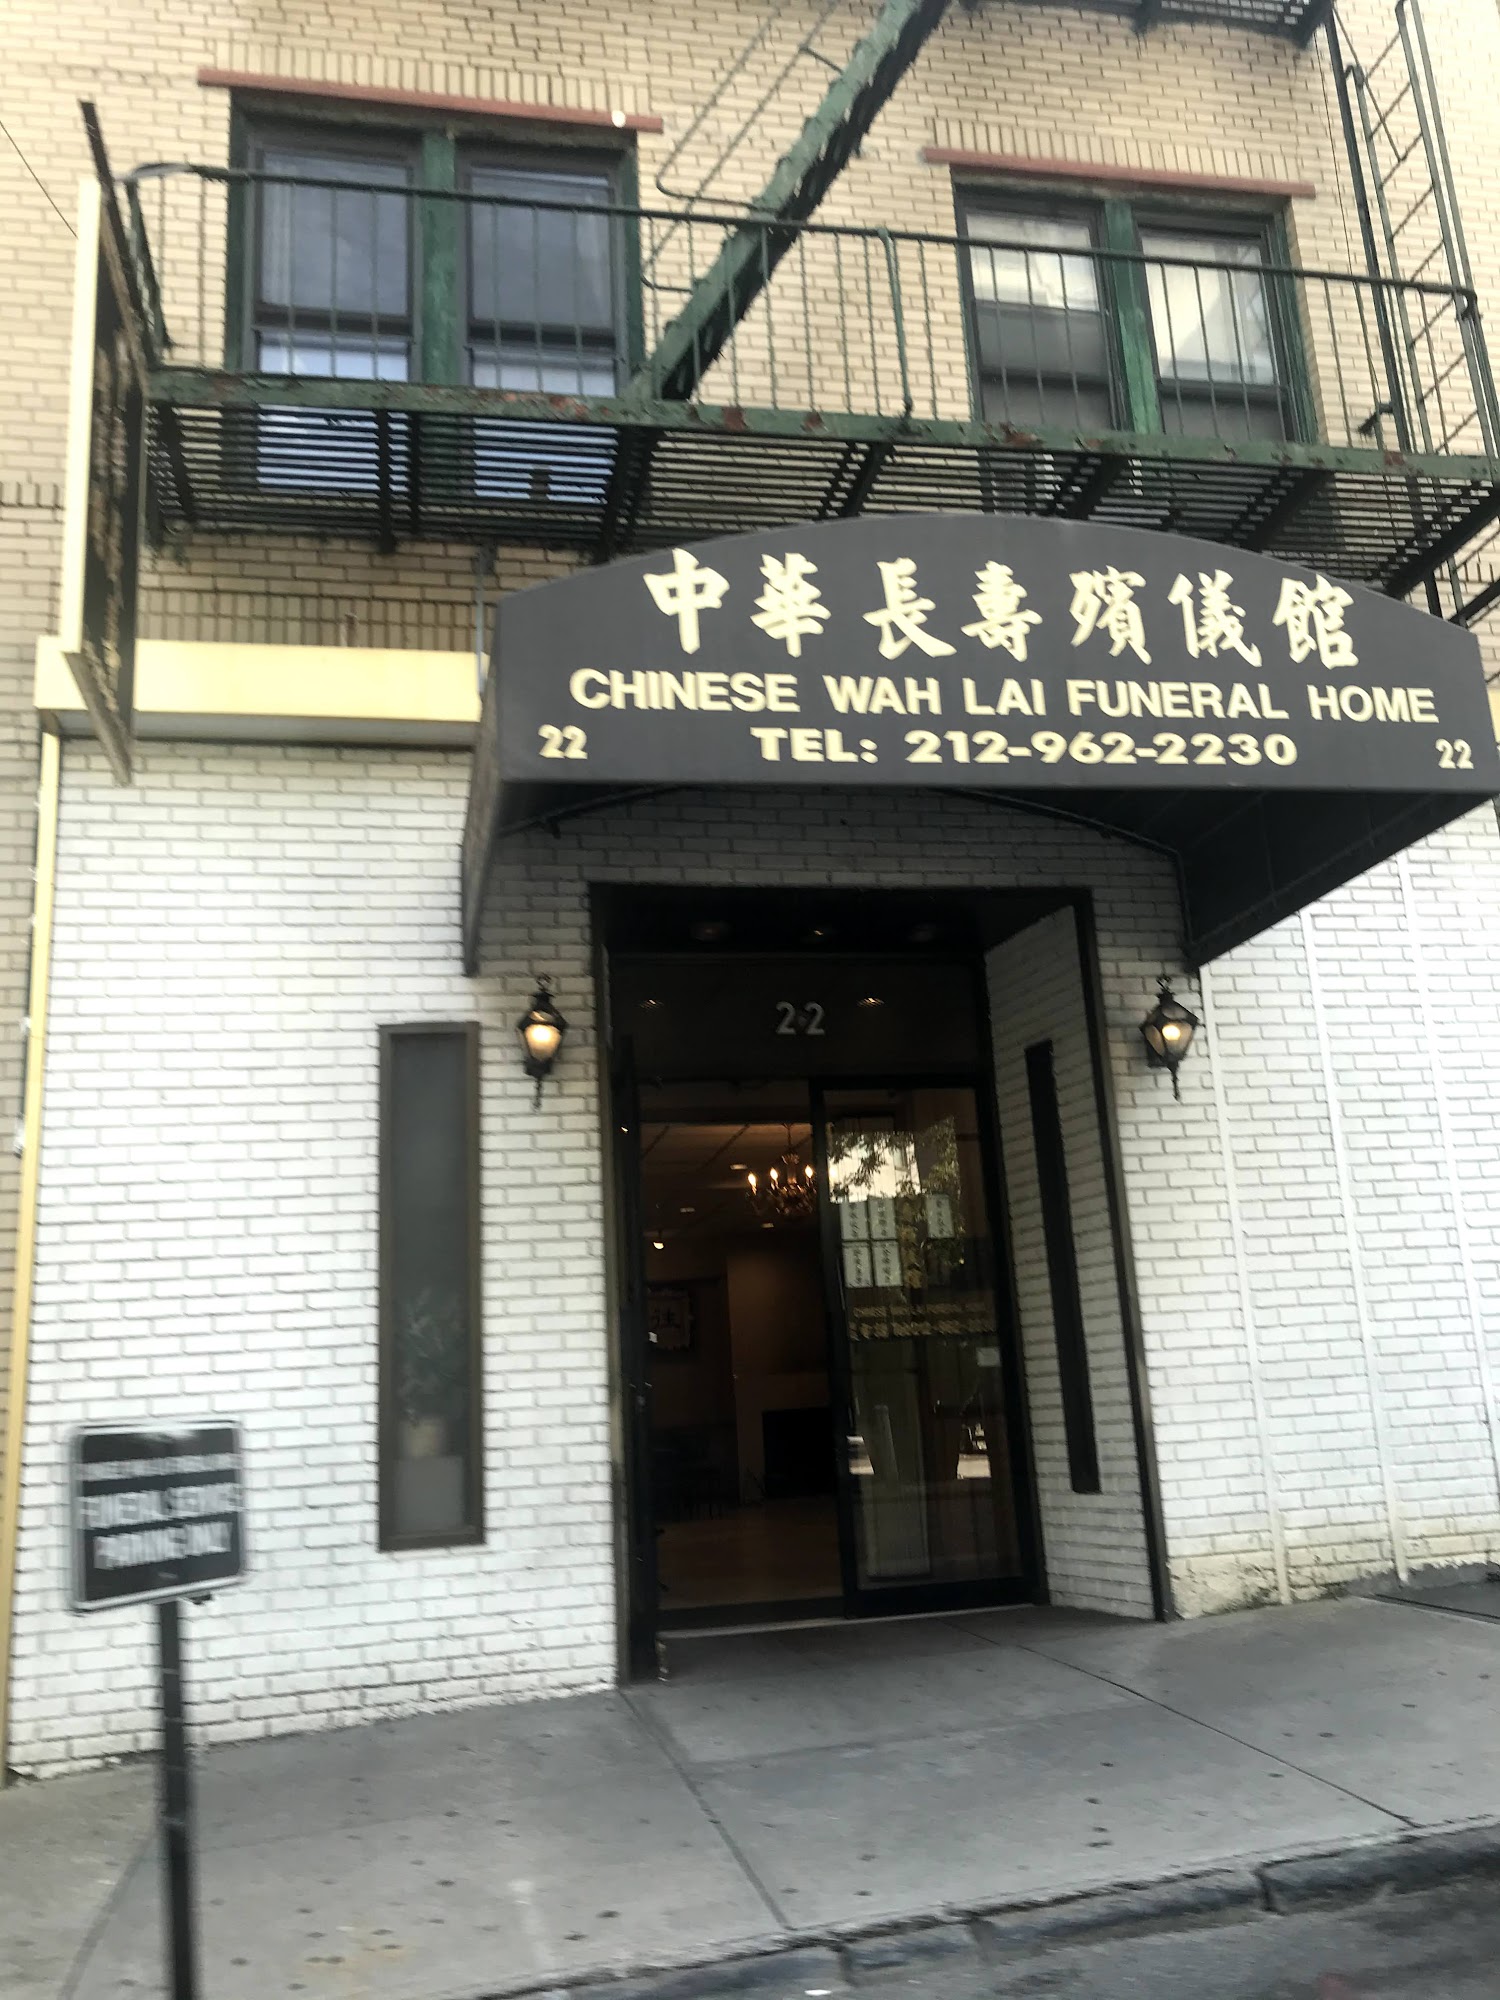 Chinese Wah Lai Funeral Home